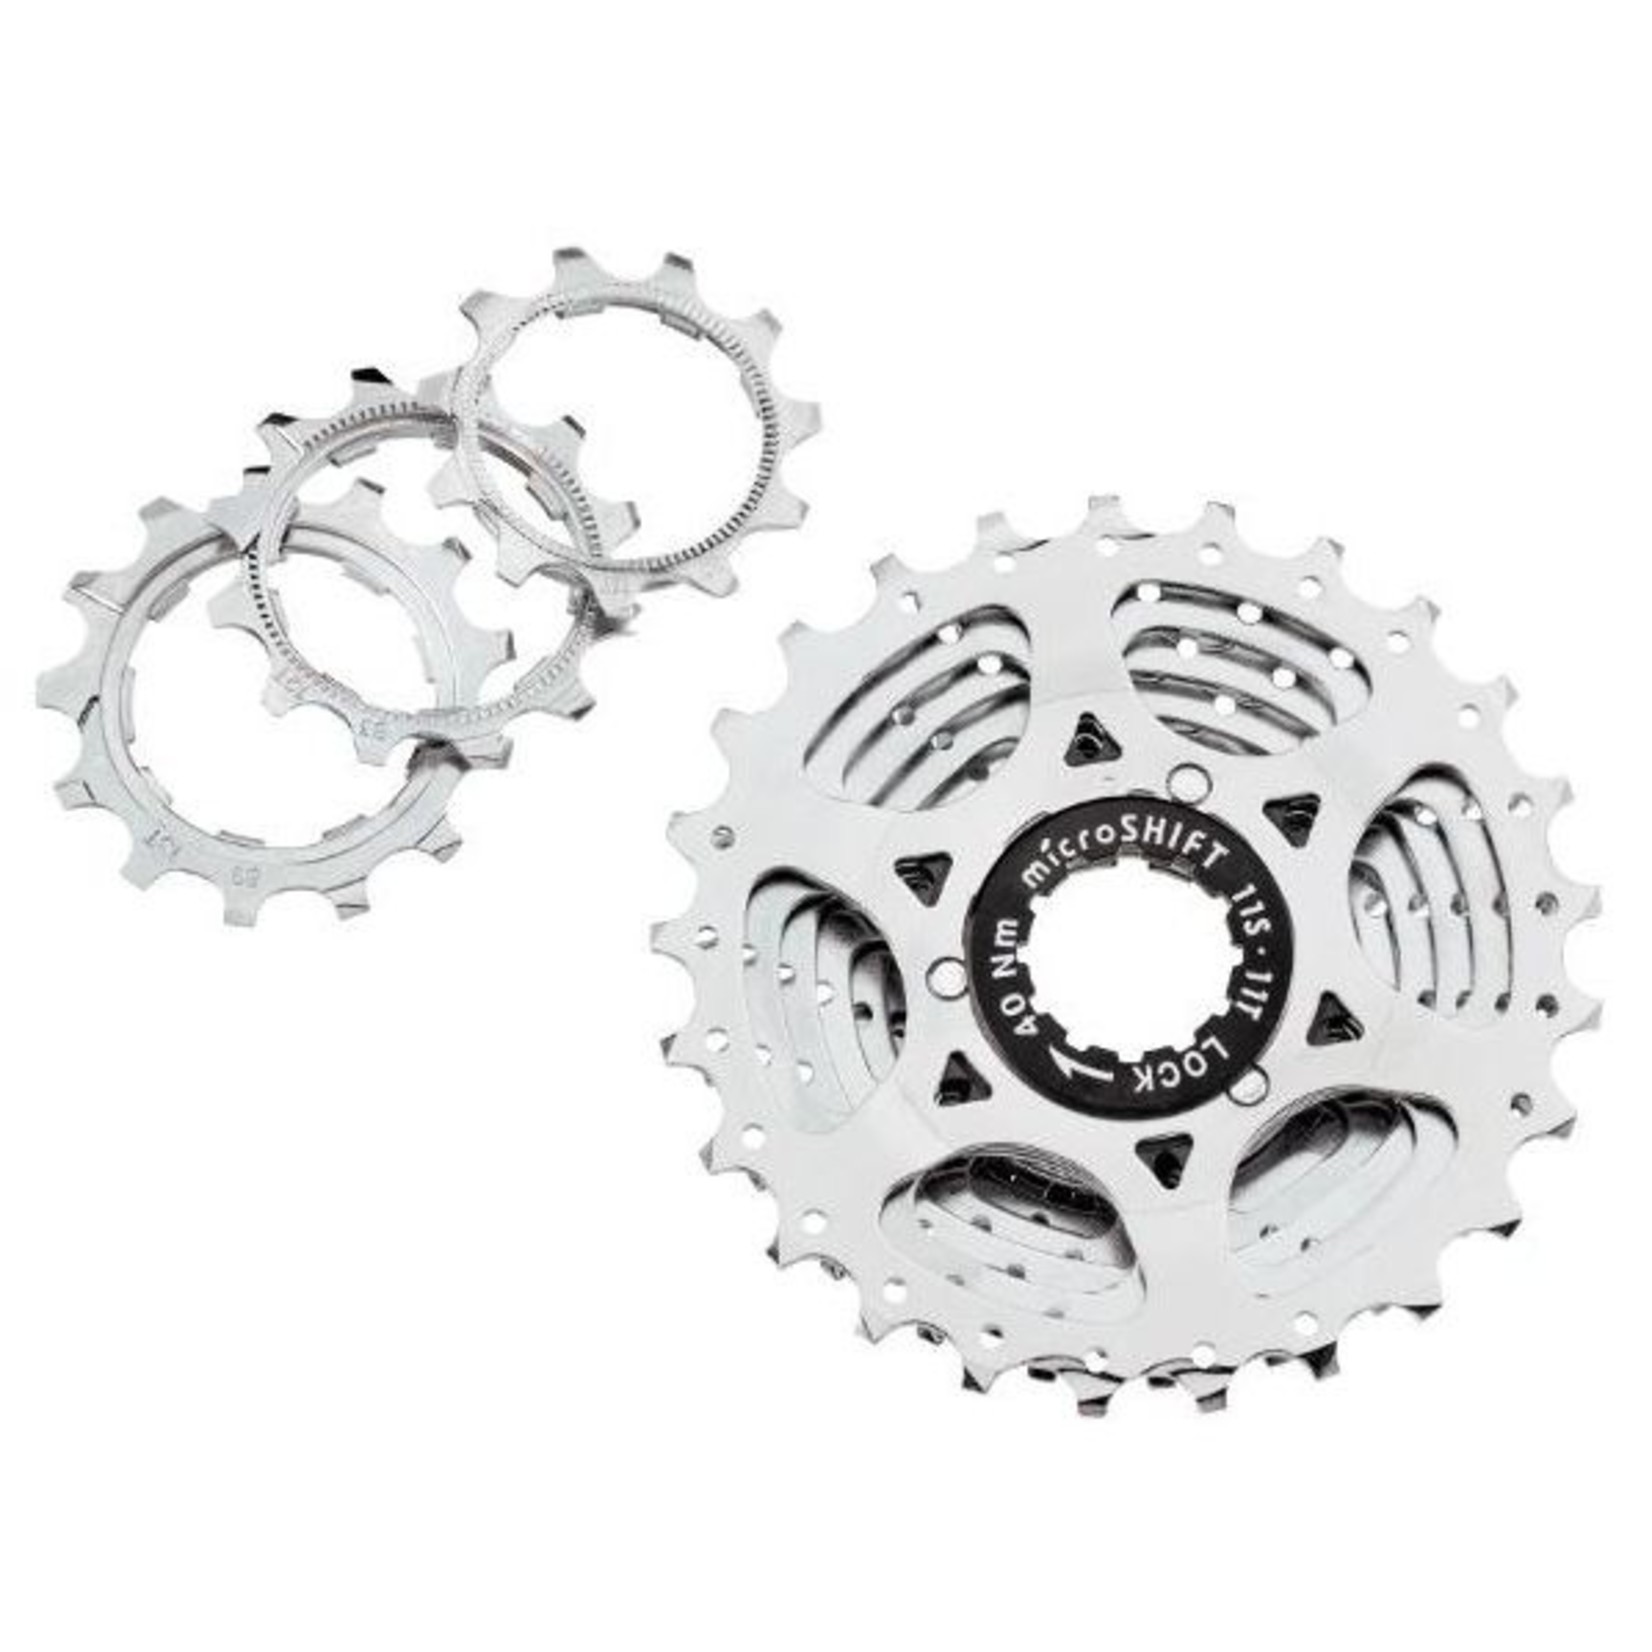 Microshift Microshift Bicycle Cassette Centos 11 CS-H1100 - 11 Speed - 11-28T - Silver